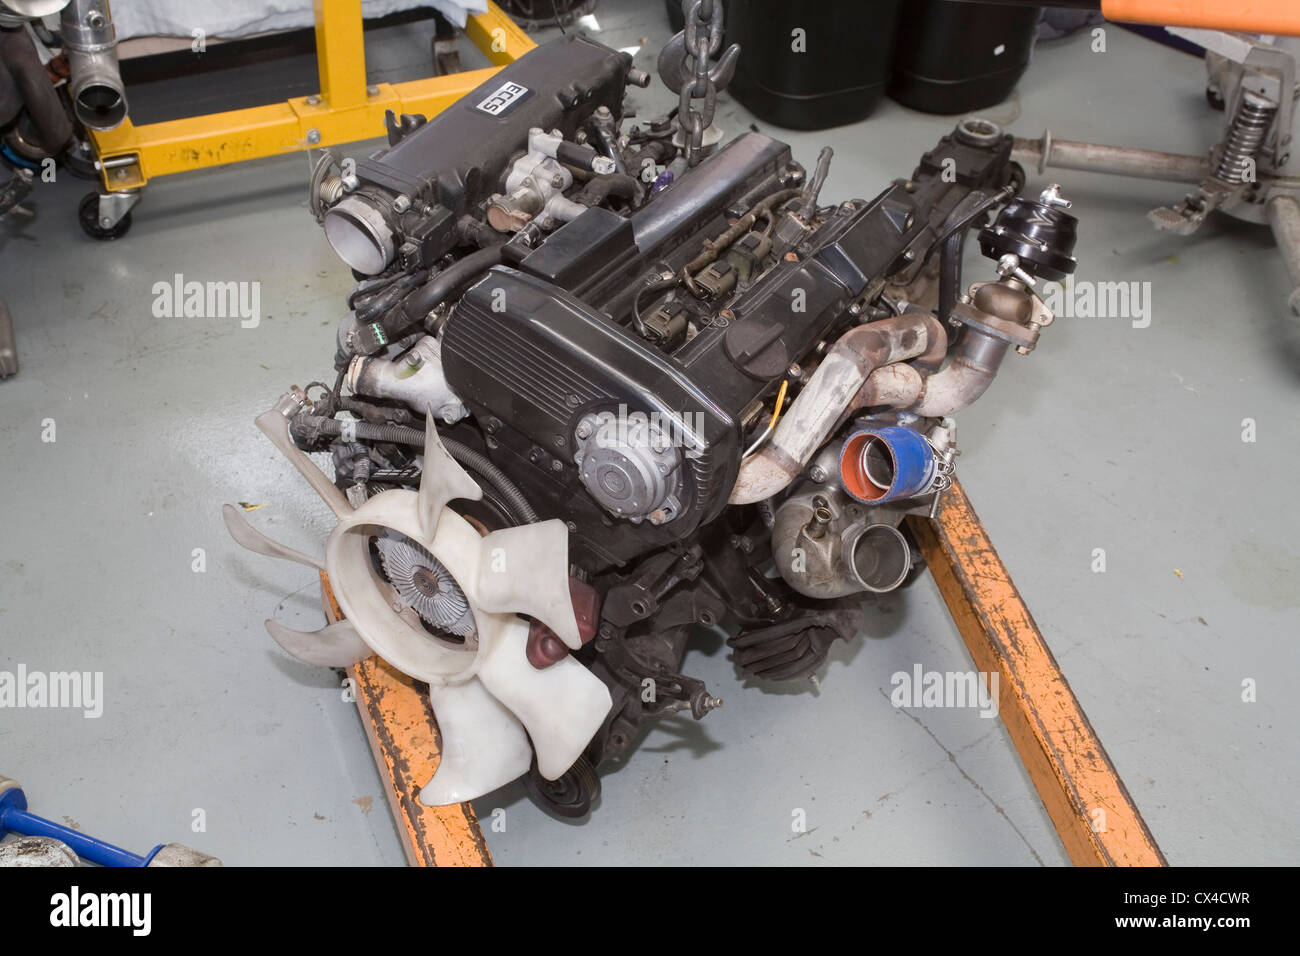 Second hand Nissan CA18DET car engine sitting in a workshop Stock Photo -  Alamy